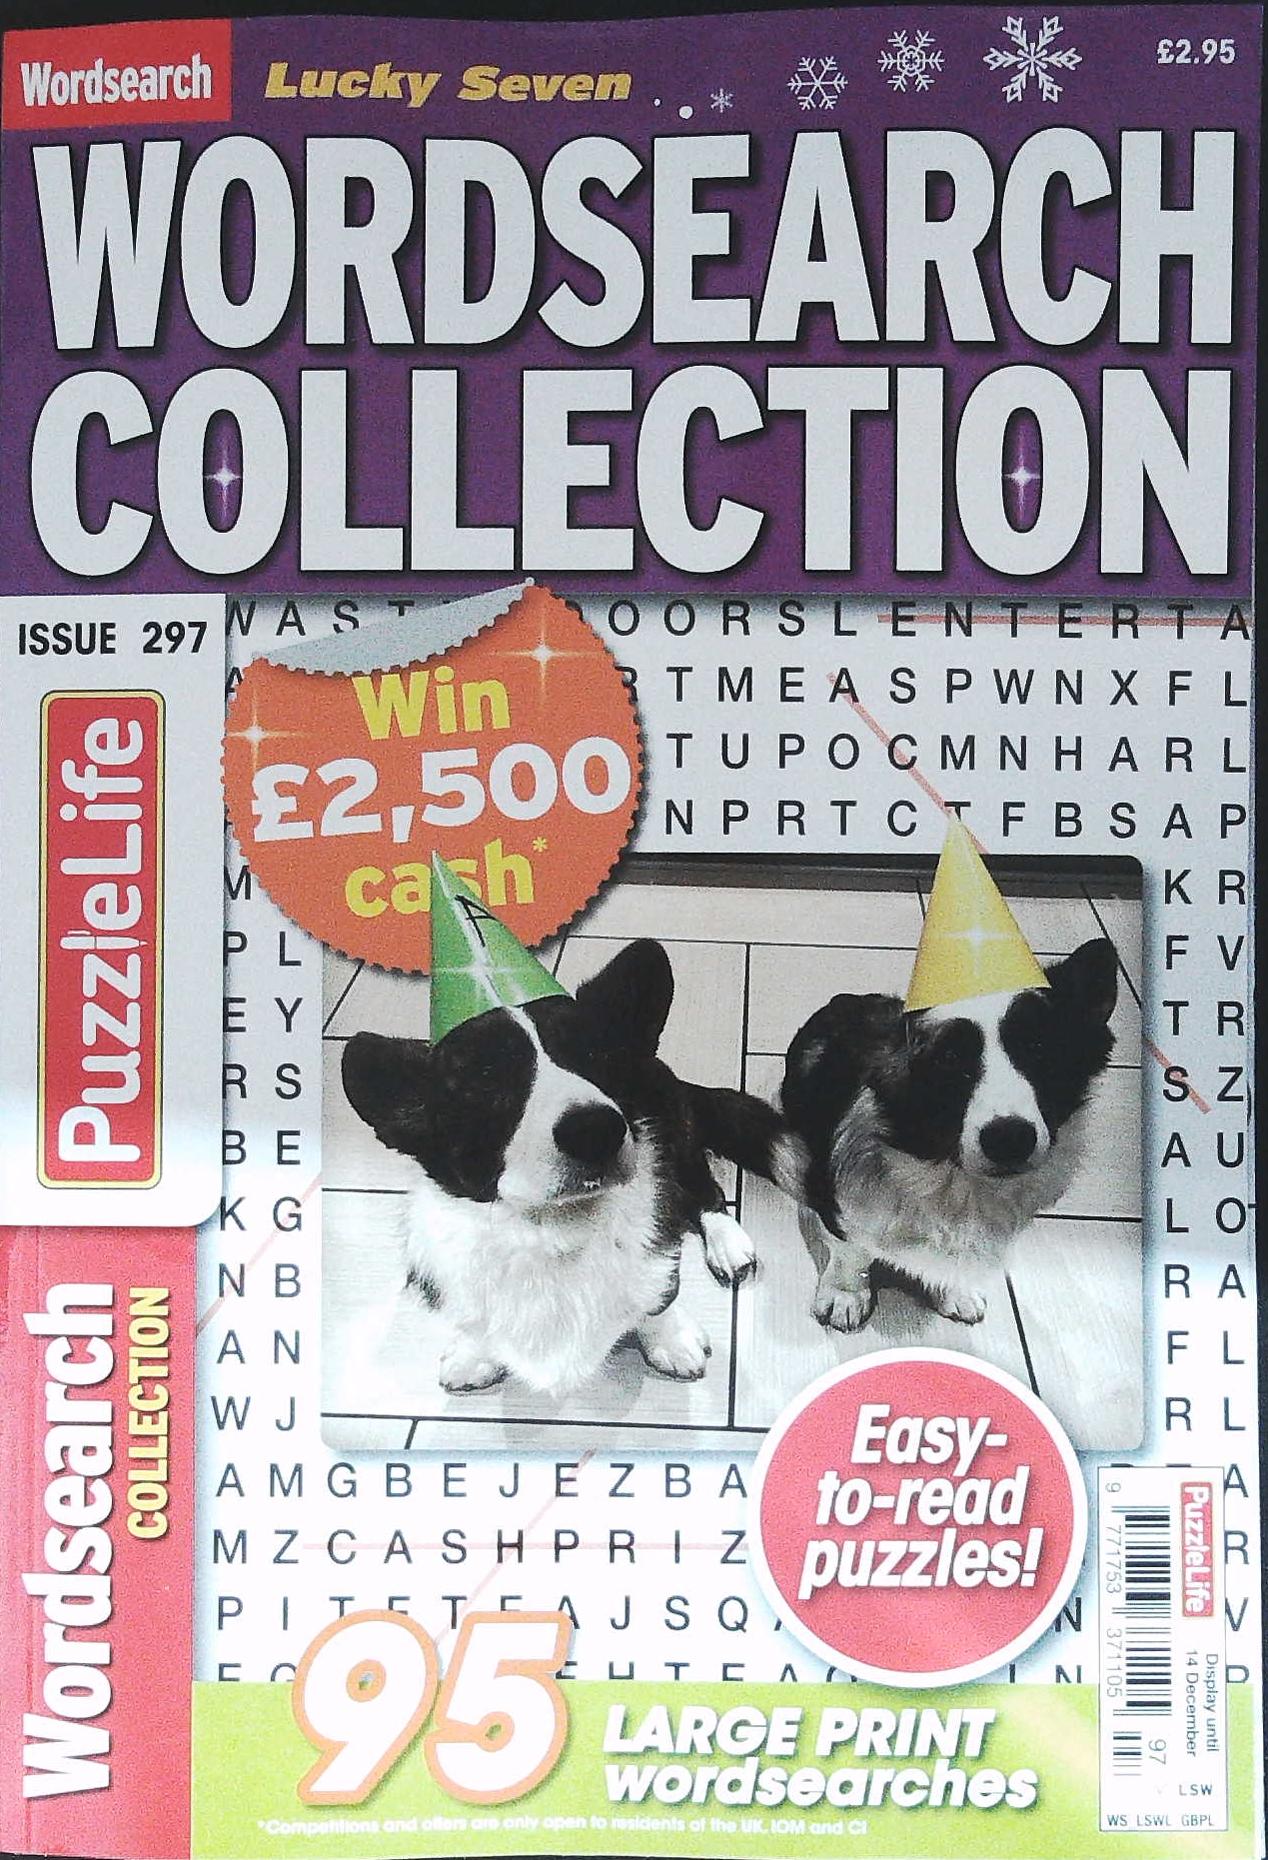 LUCKY SEVEN WORDSEARCH COLLECTION